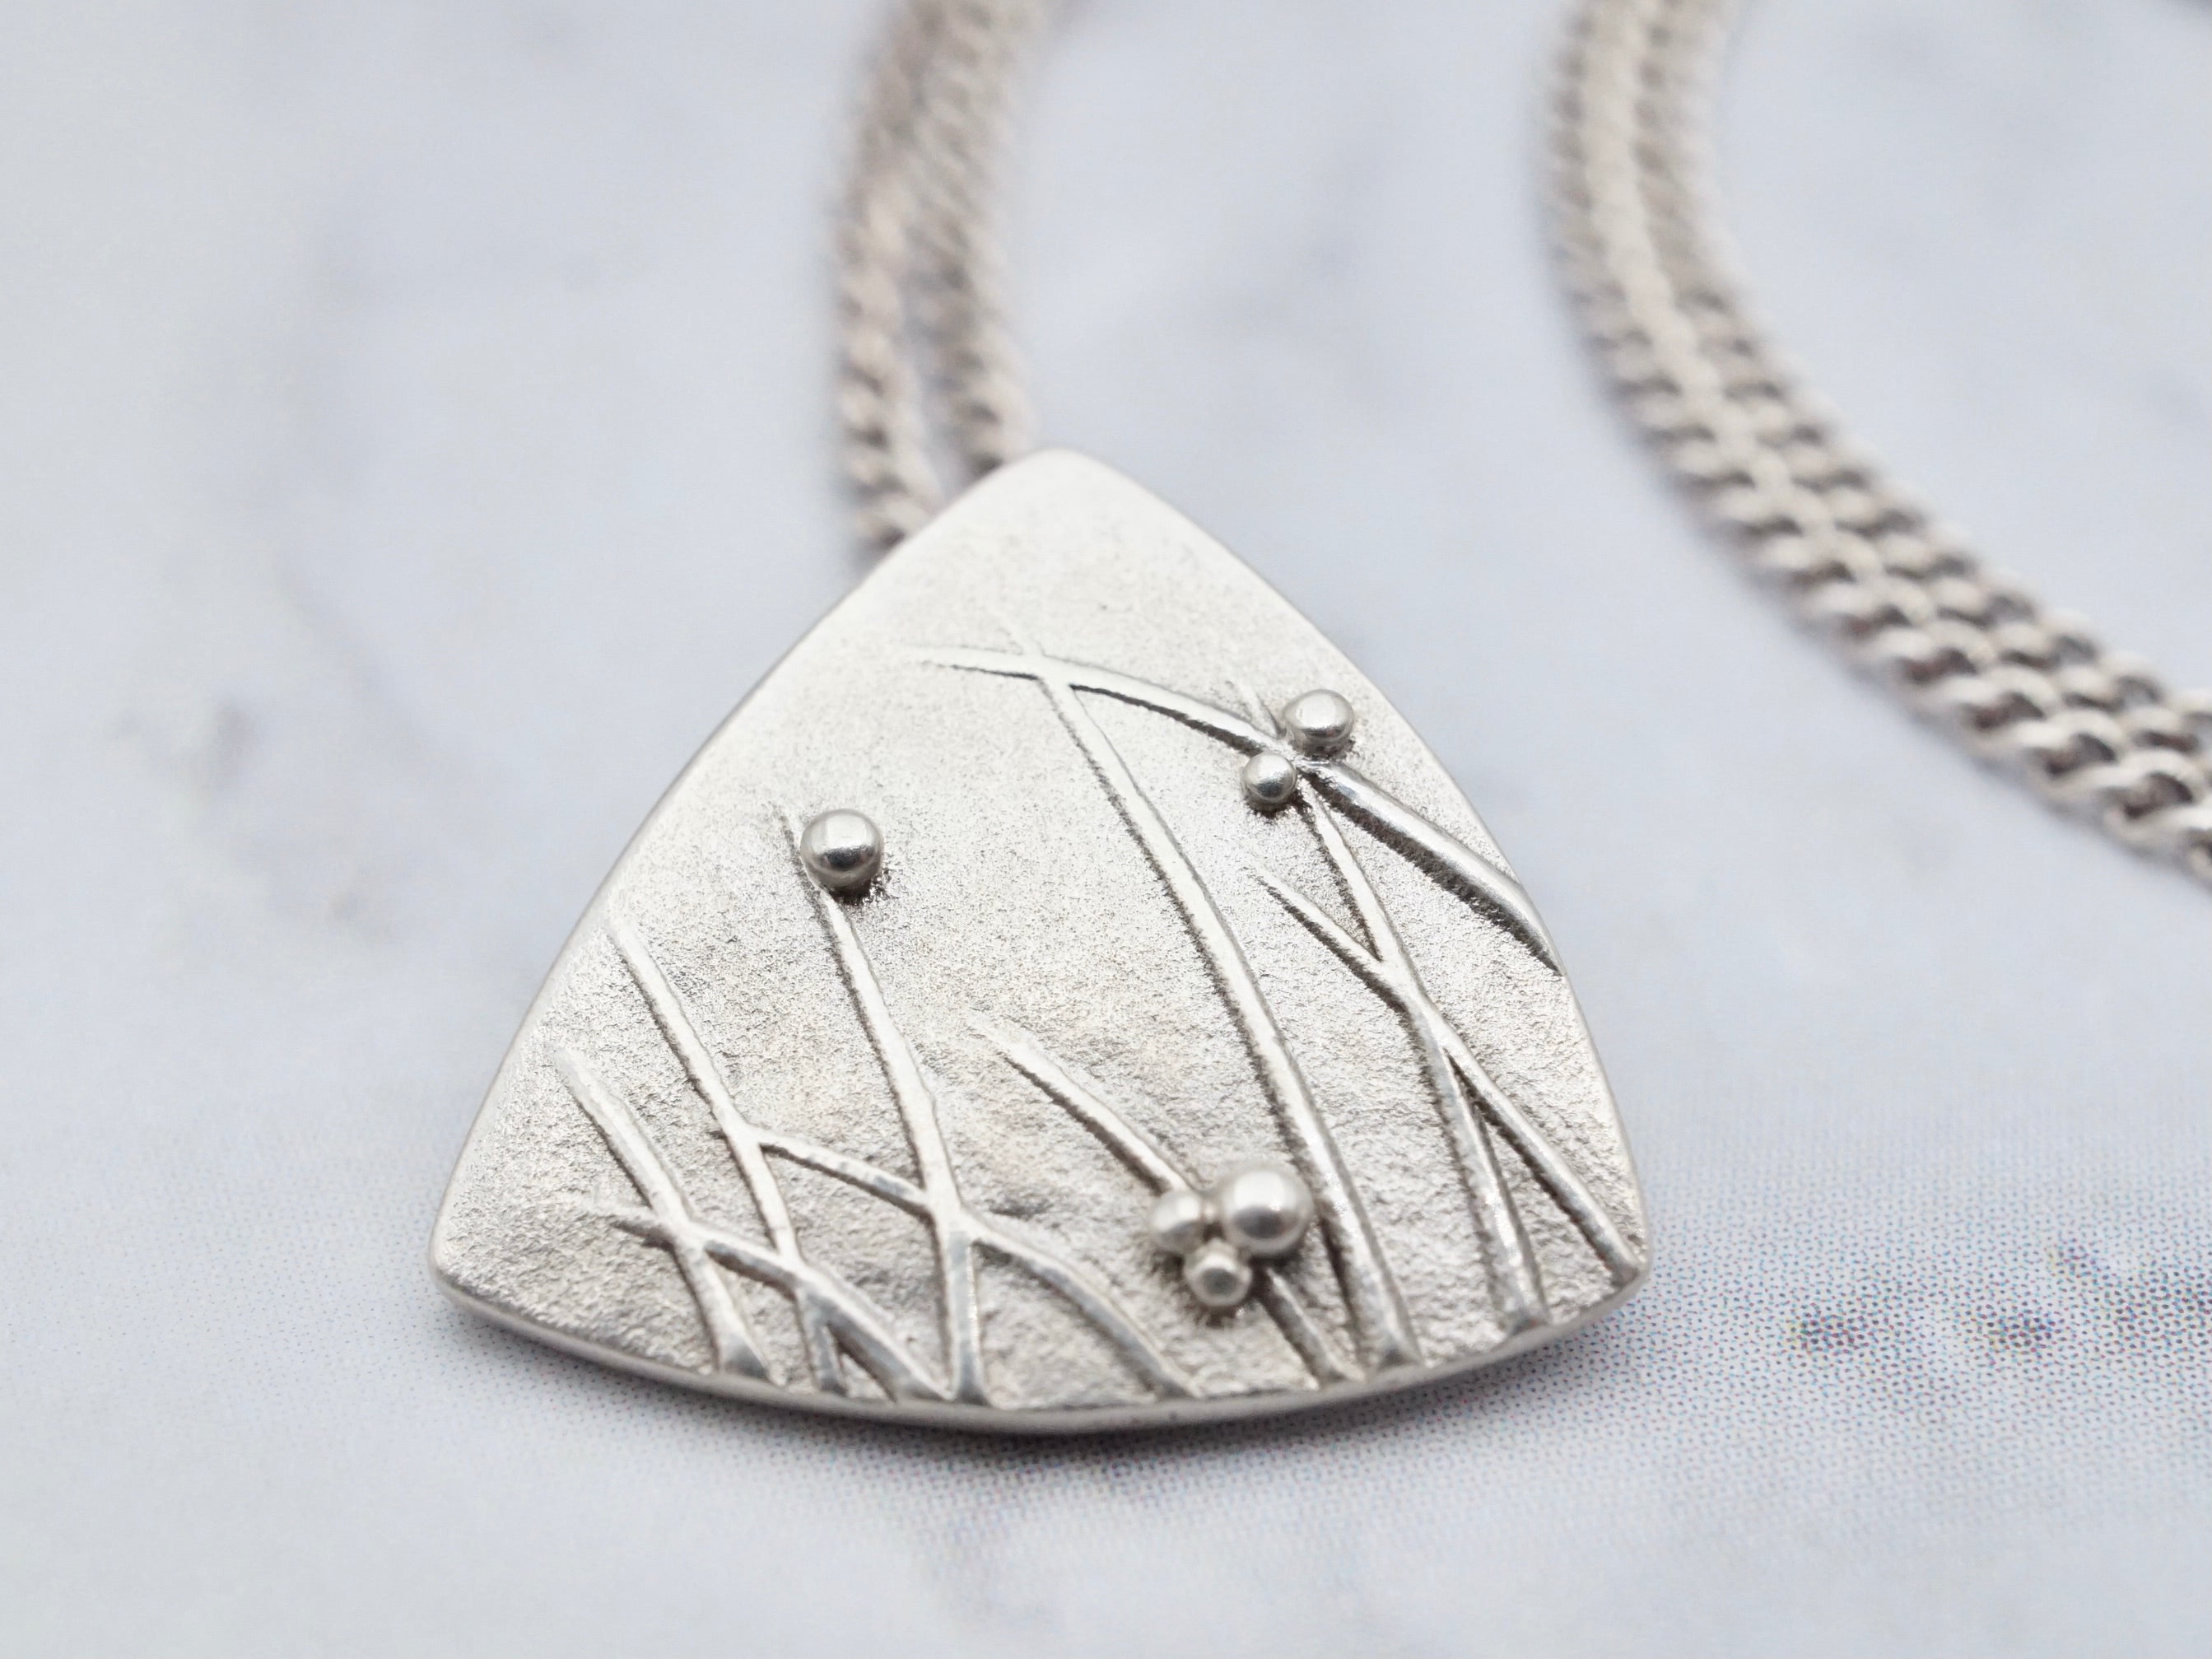 Vintage modern naturalist handmade sterling triangle pendant on sterling curb link chain, 18.5